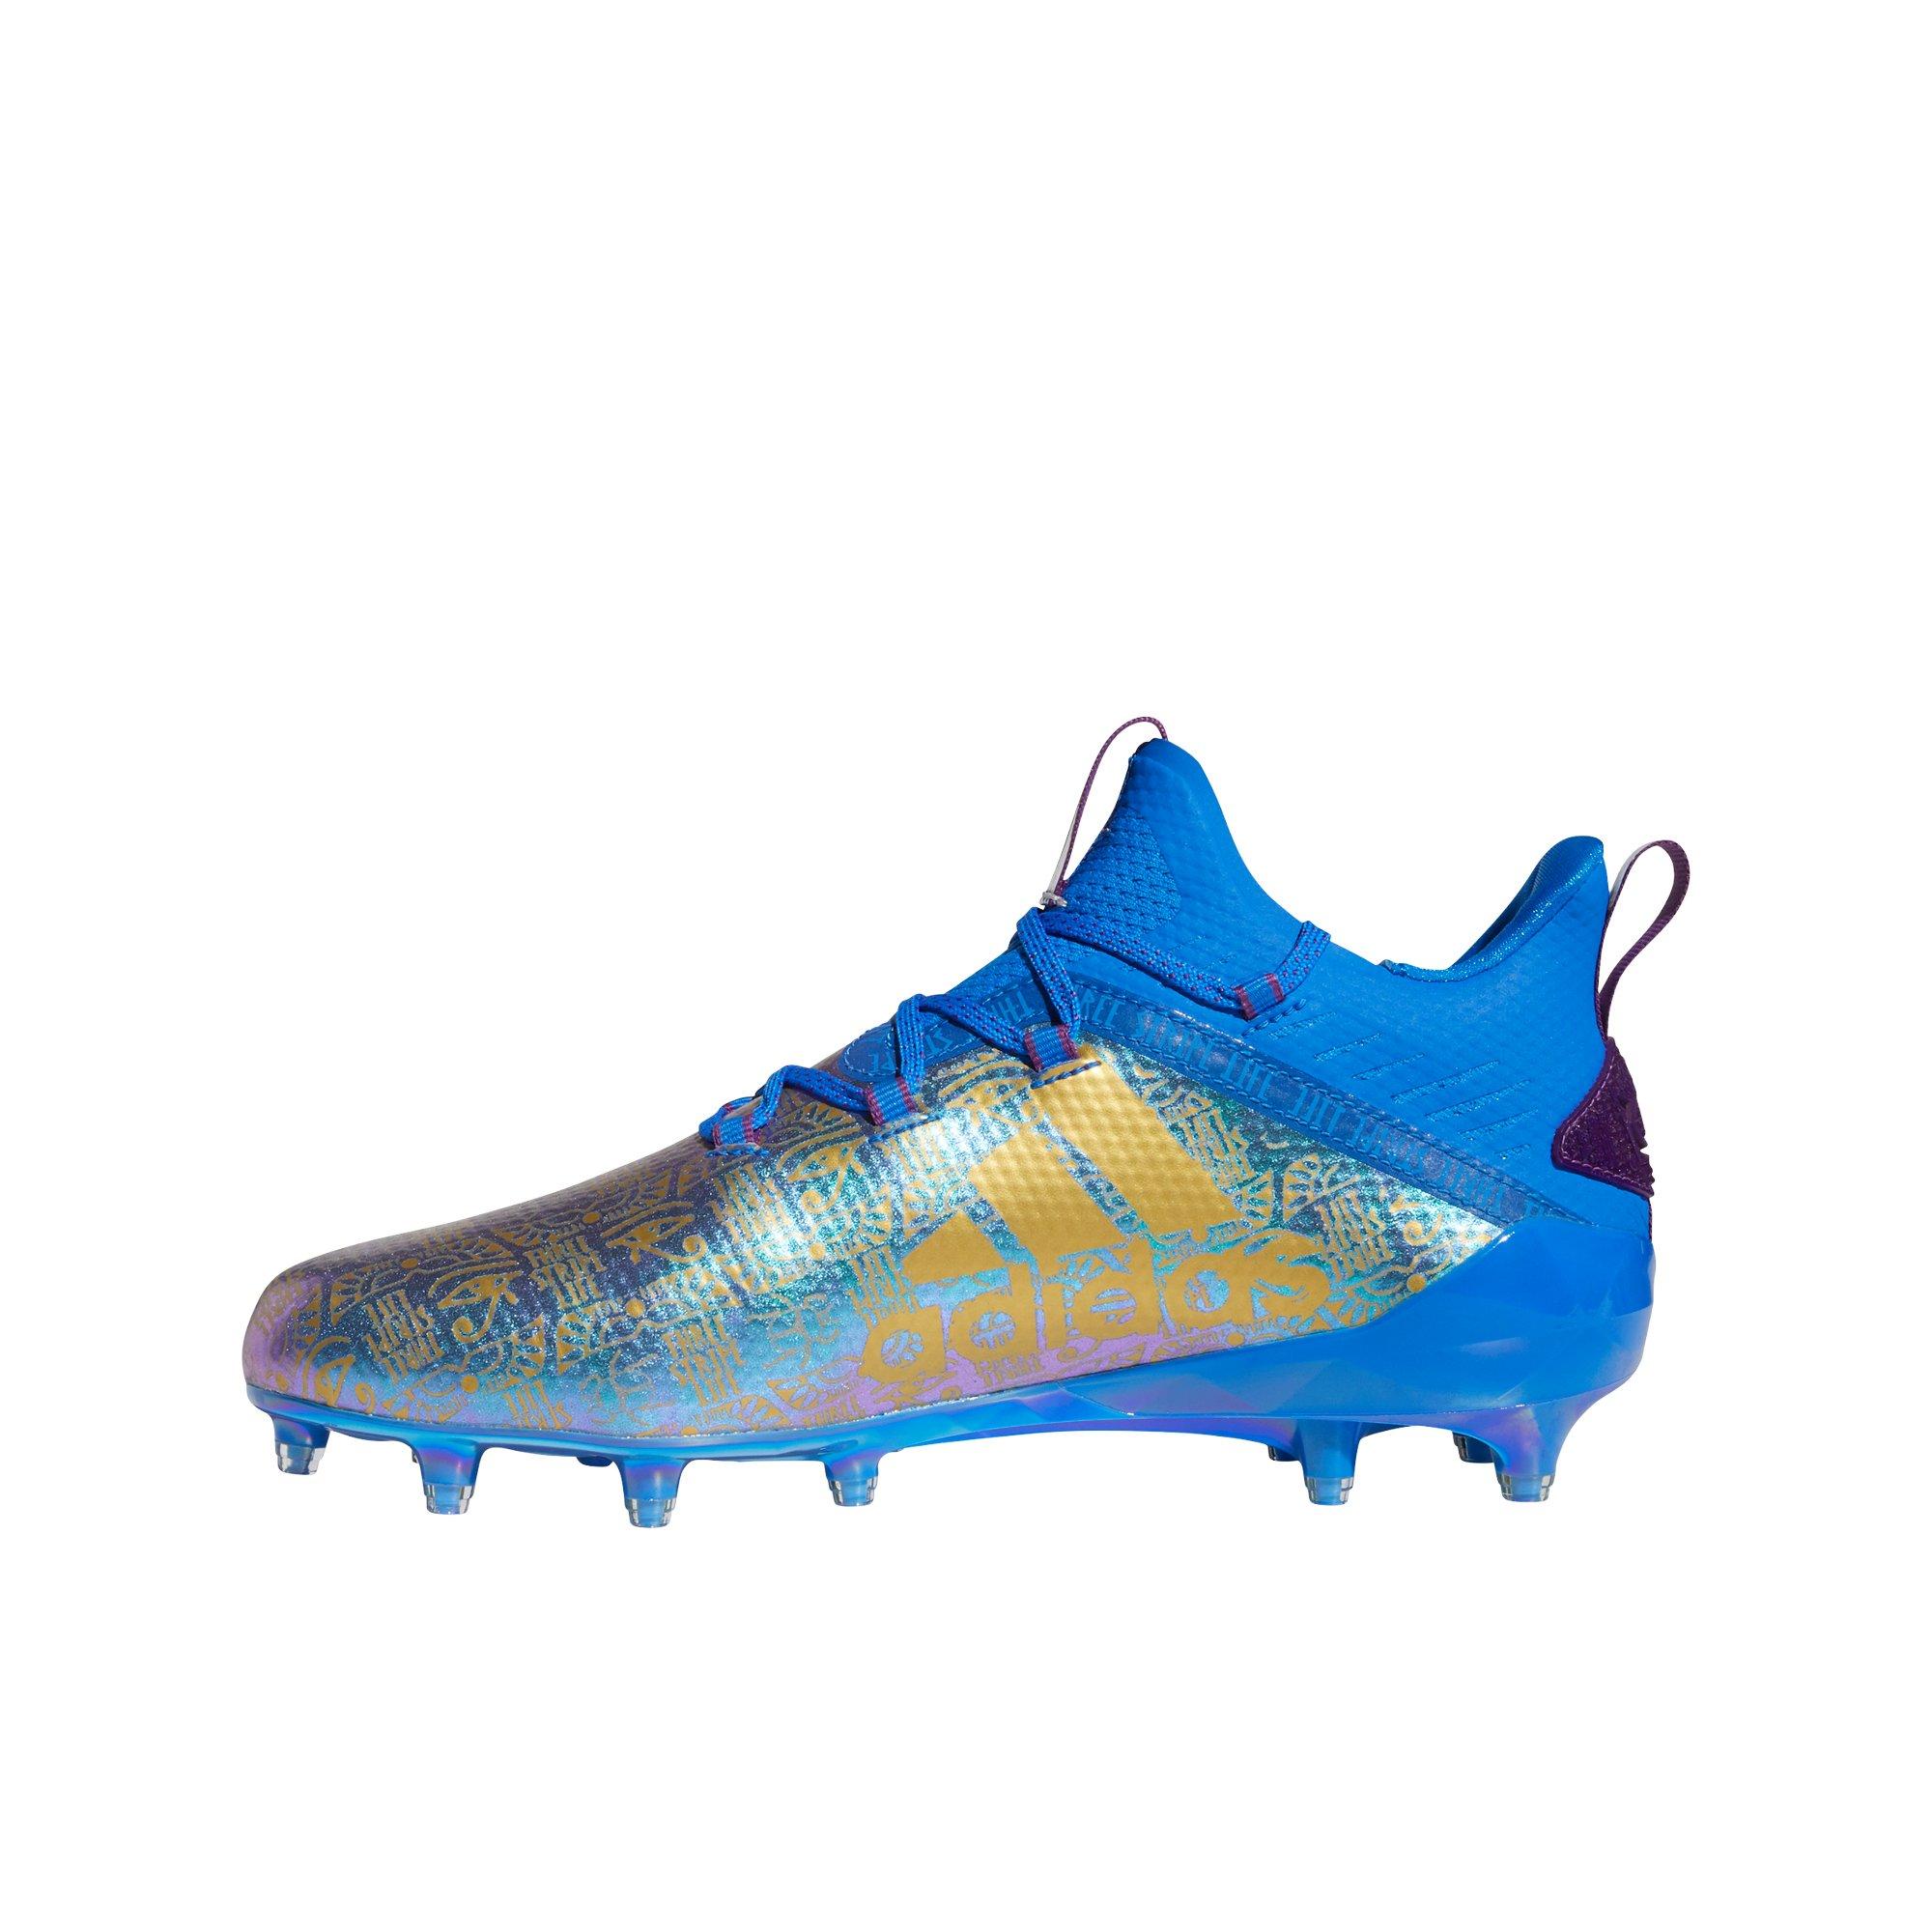 navy blue and gold football cleats